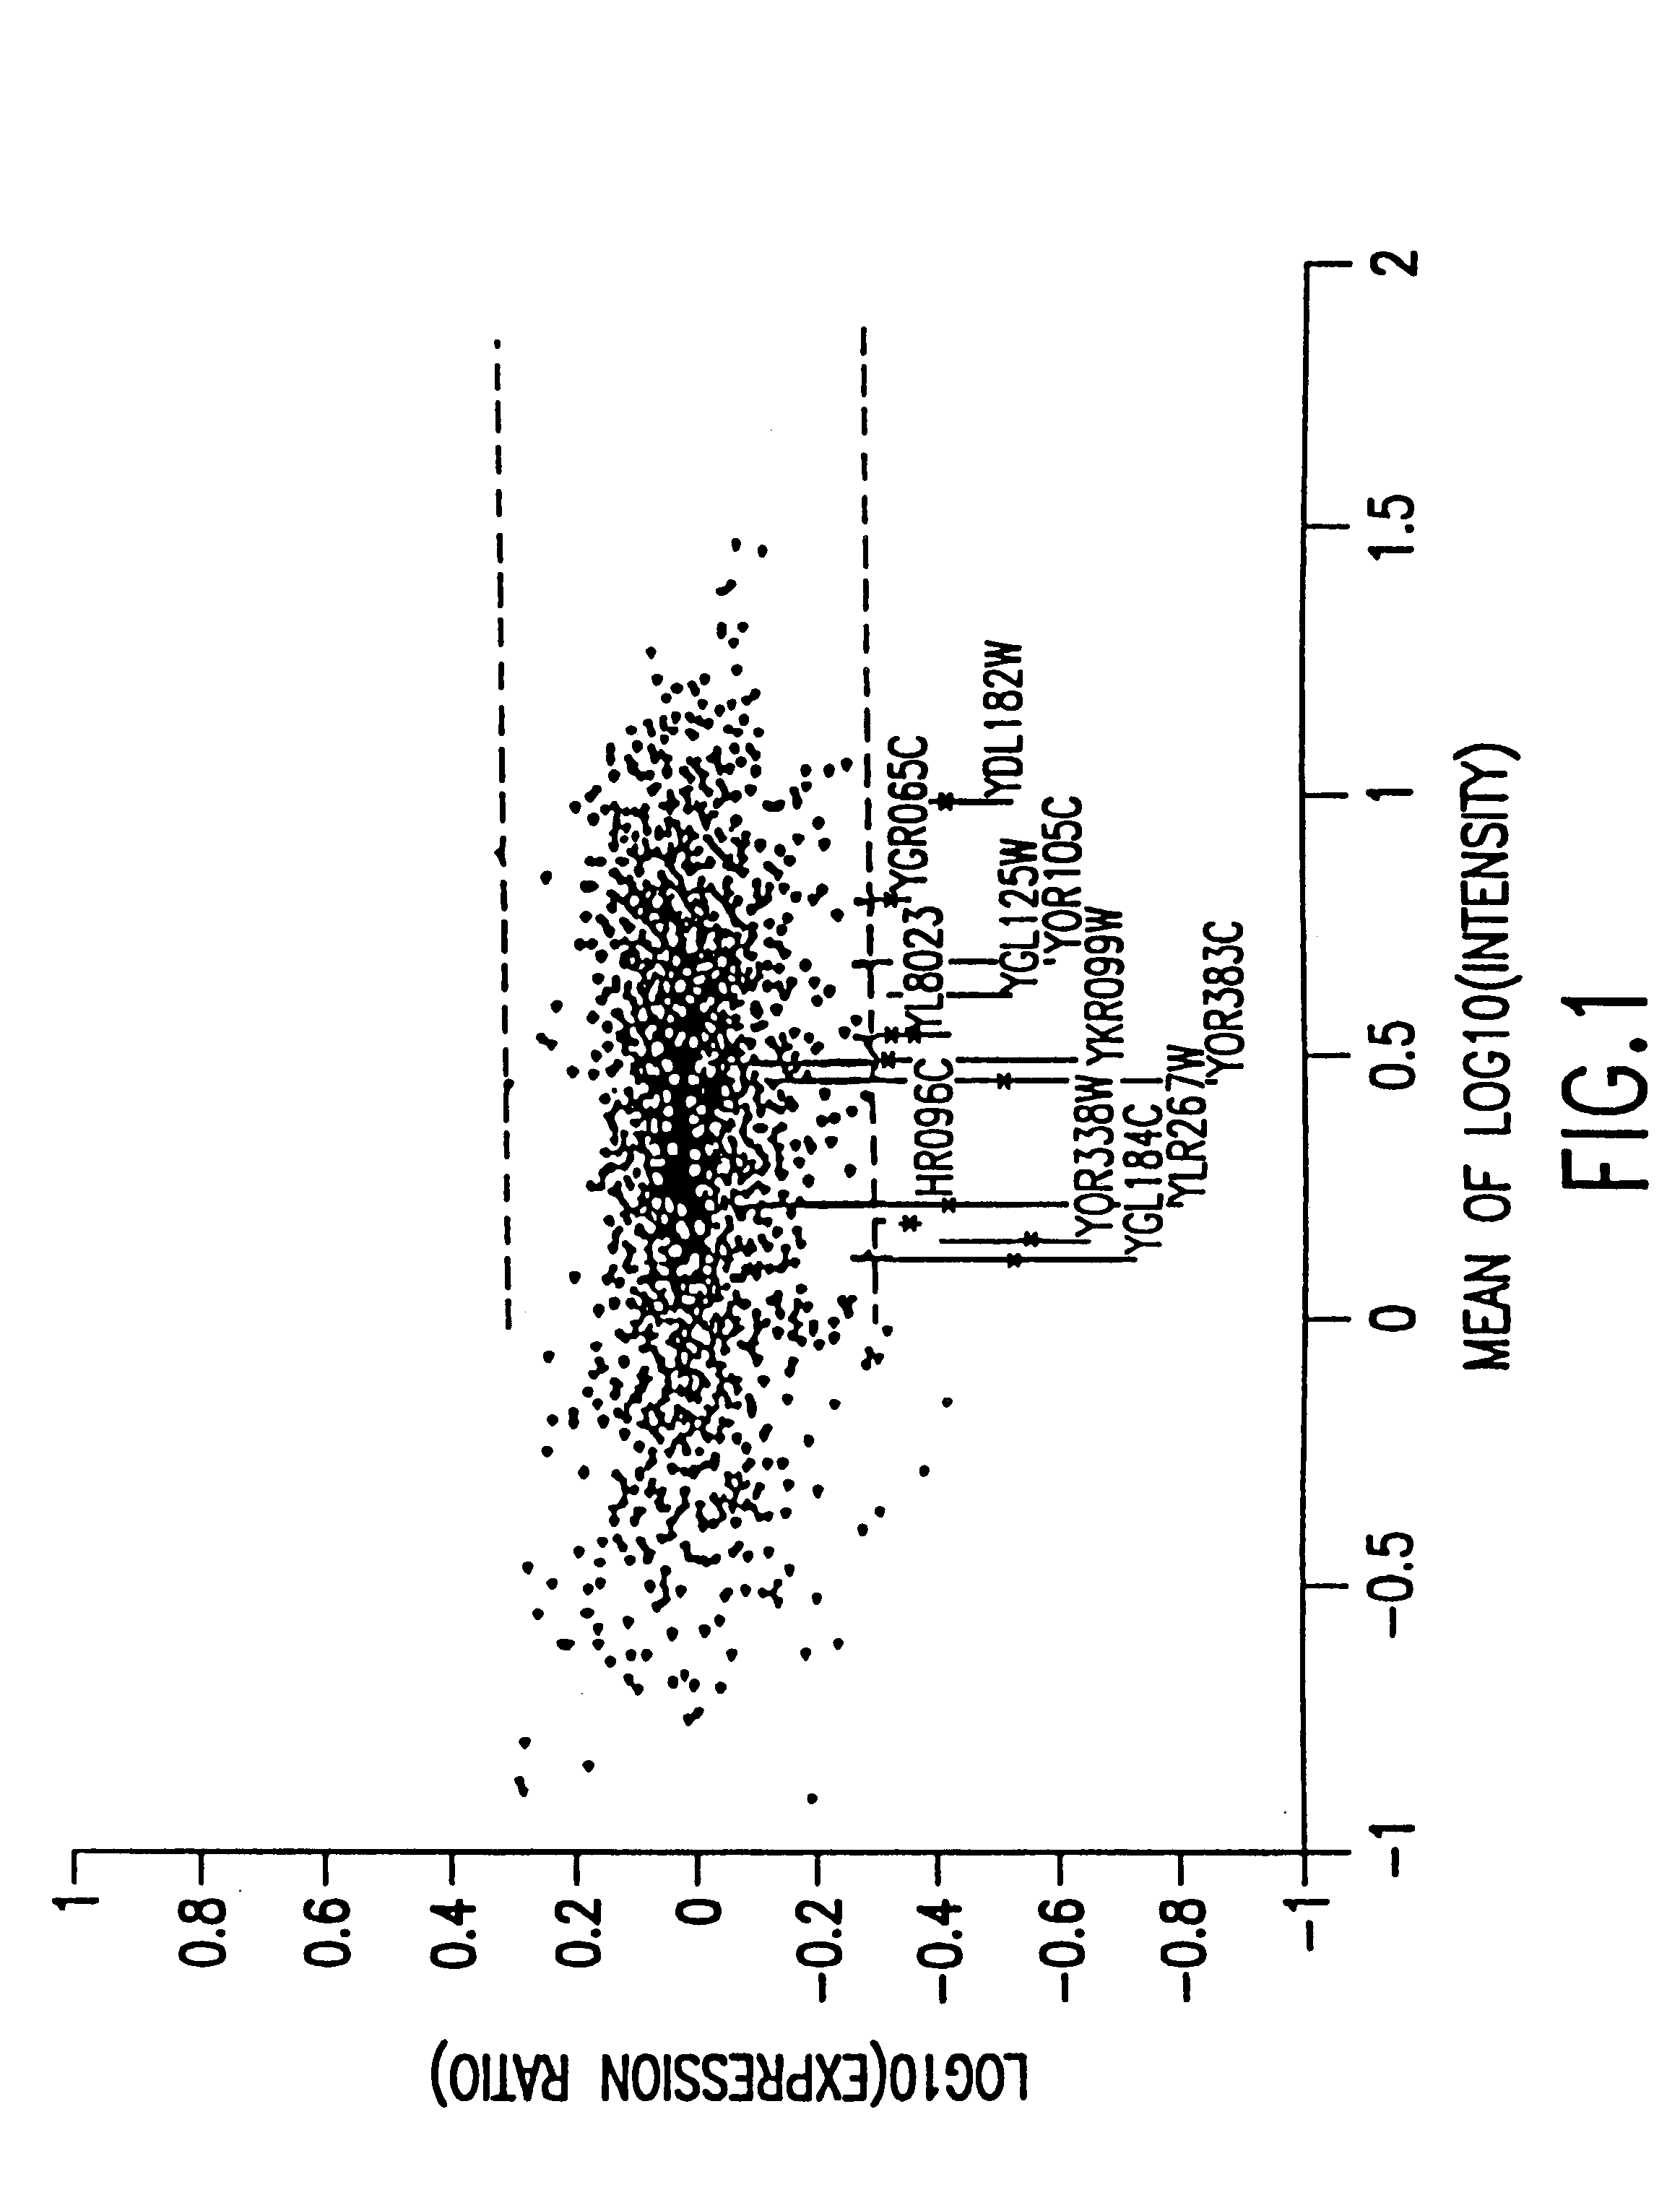 Methods of monitoring disease states and therapies using gene expression profiles